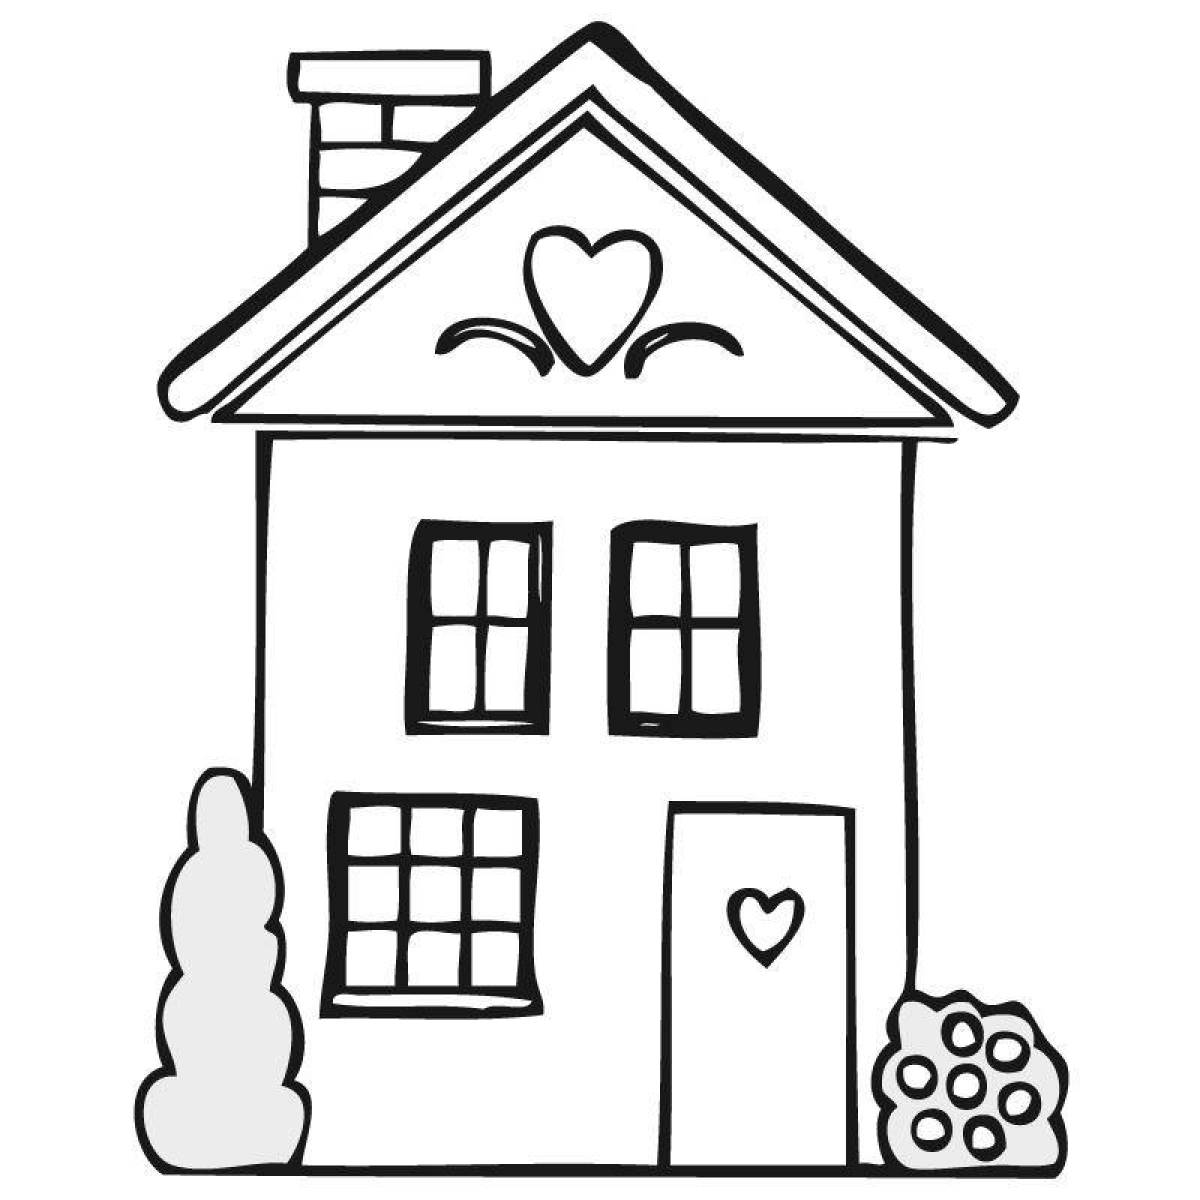 Coloring cute house for kids